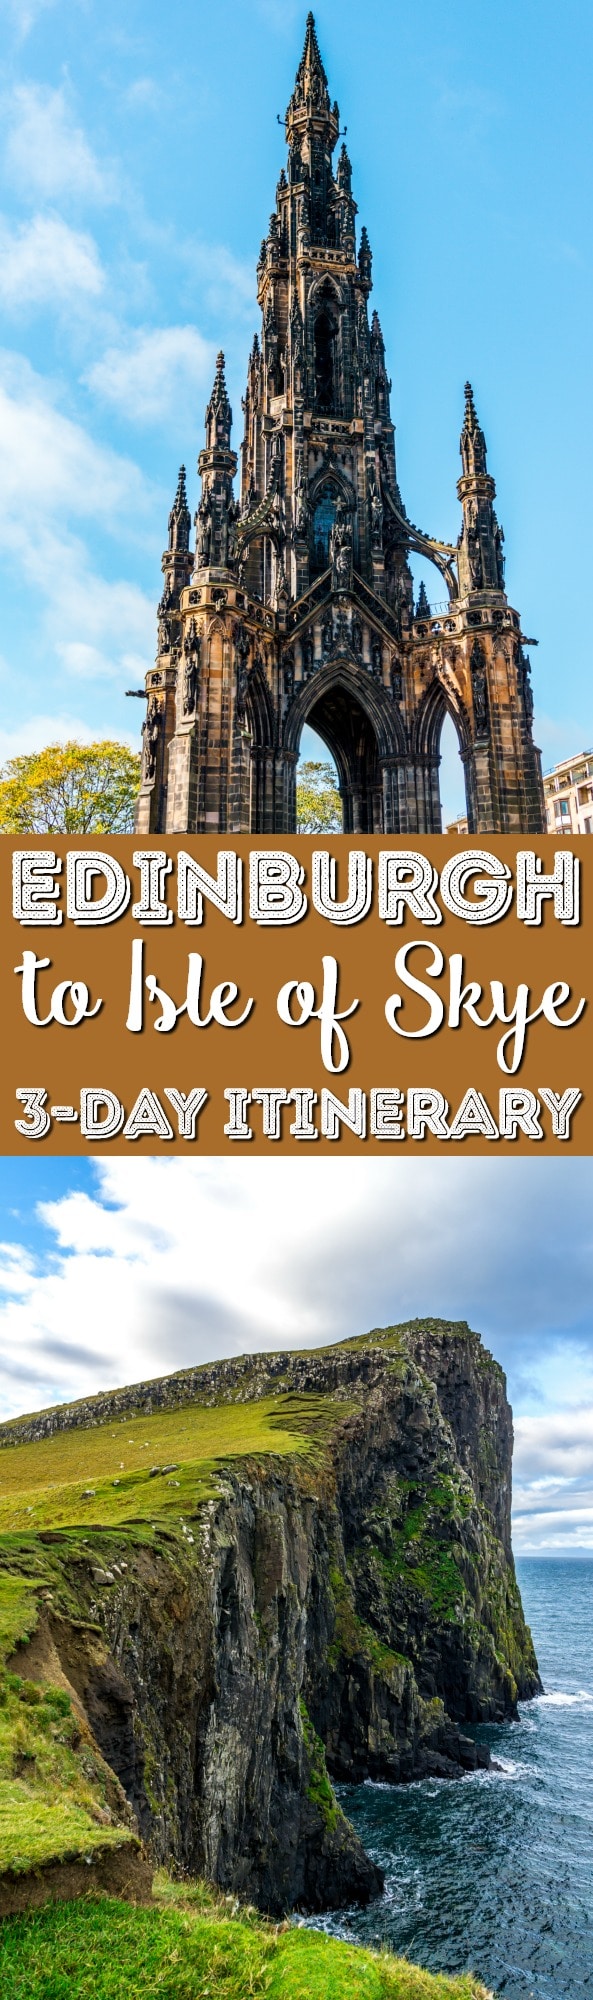 If you're visiting Scotland, make sure you make the trip from Edinburgh to the Isle of Skye! Here's a 3-day itinerary to help guide you along your journey! via @sugarandsoulco